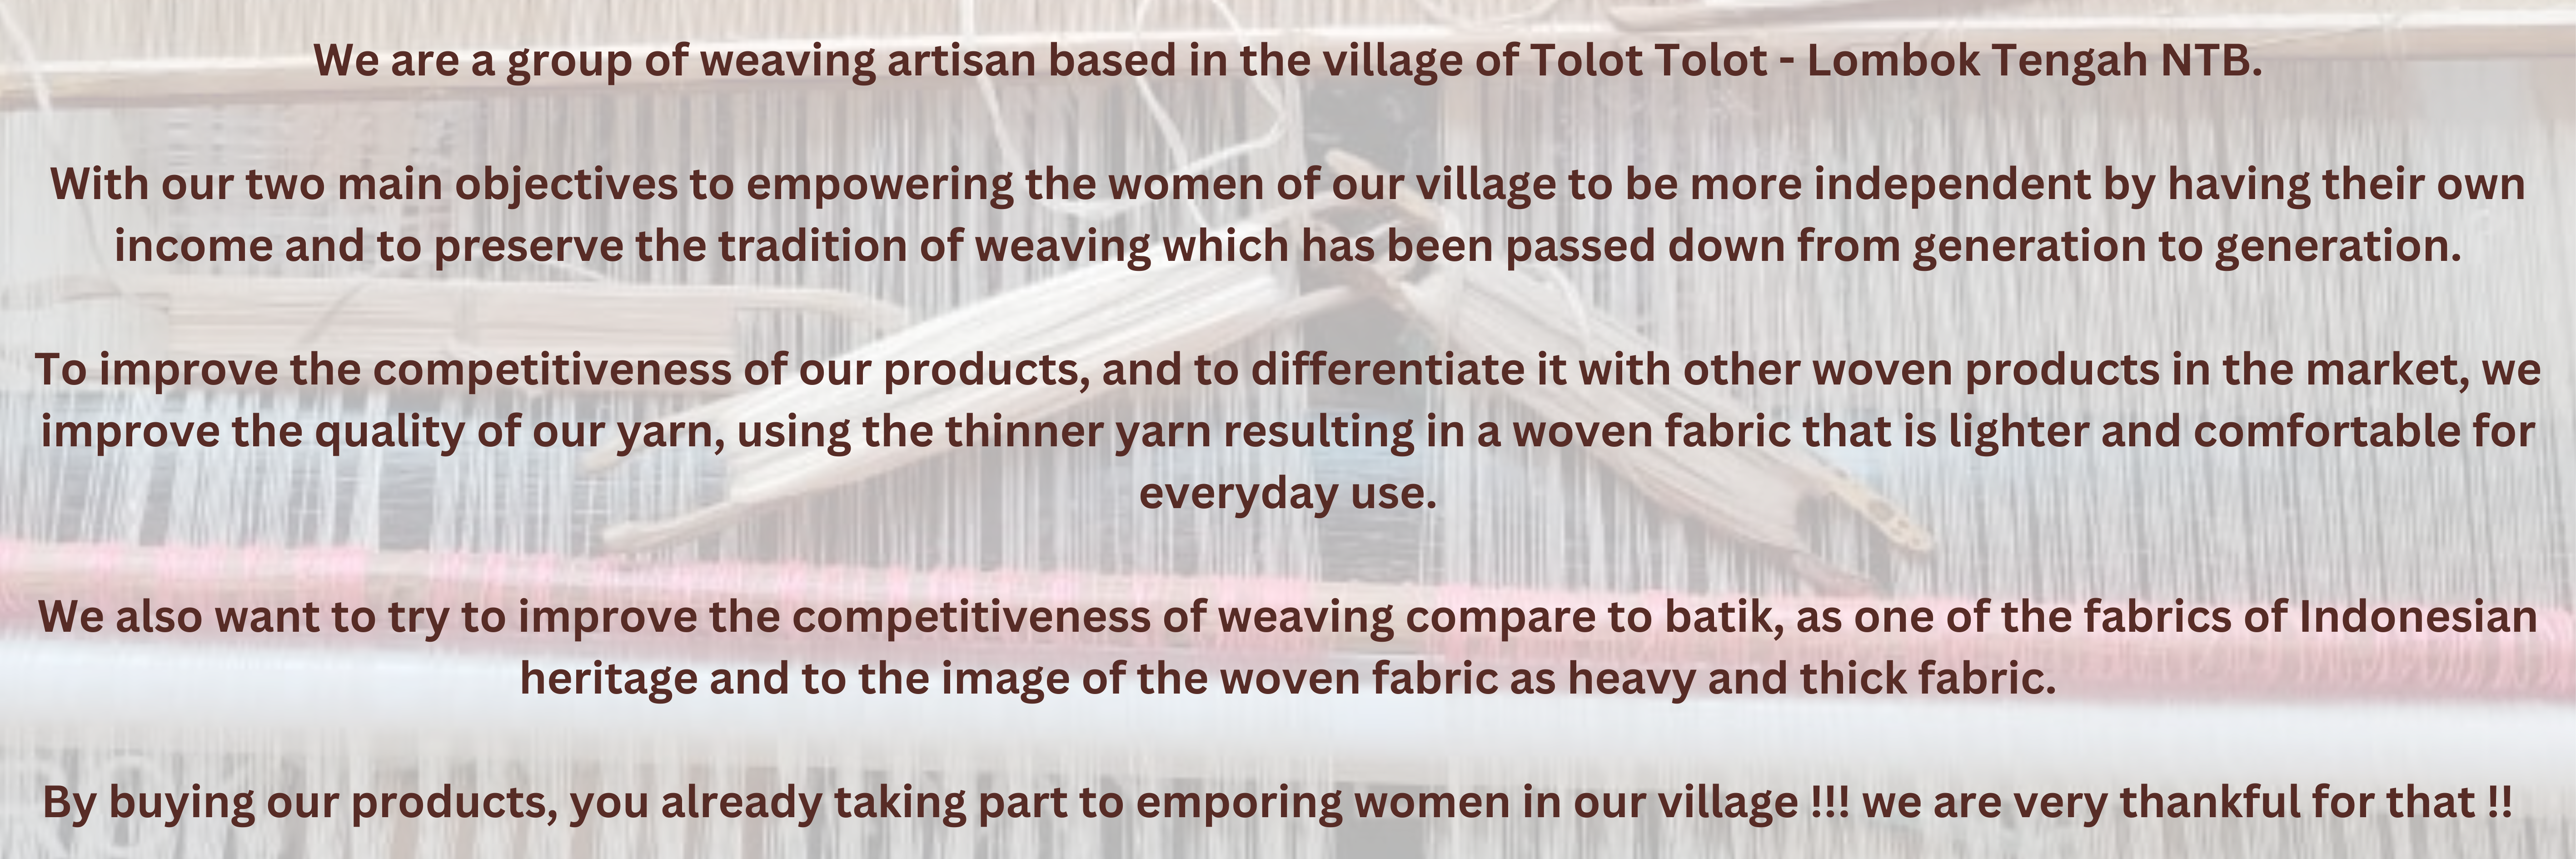 Tenun eBoon - we are a group of weaving artisan based in the village of Tolot Tolot - Lombok Tengah NTB. With our two main objectives to empowering the women of our village to be more independent  (1)